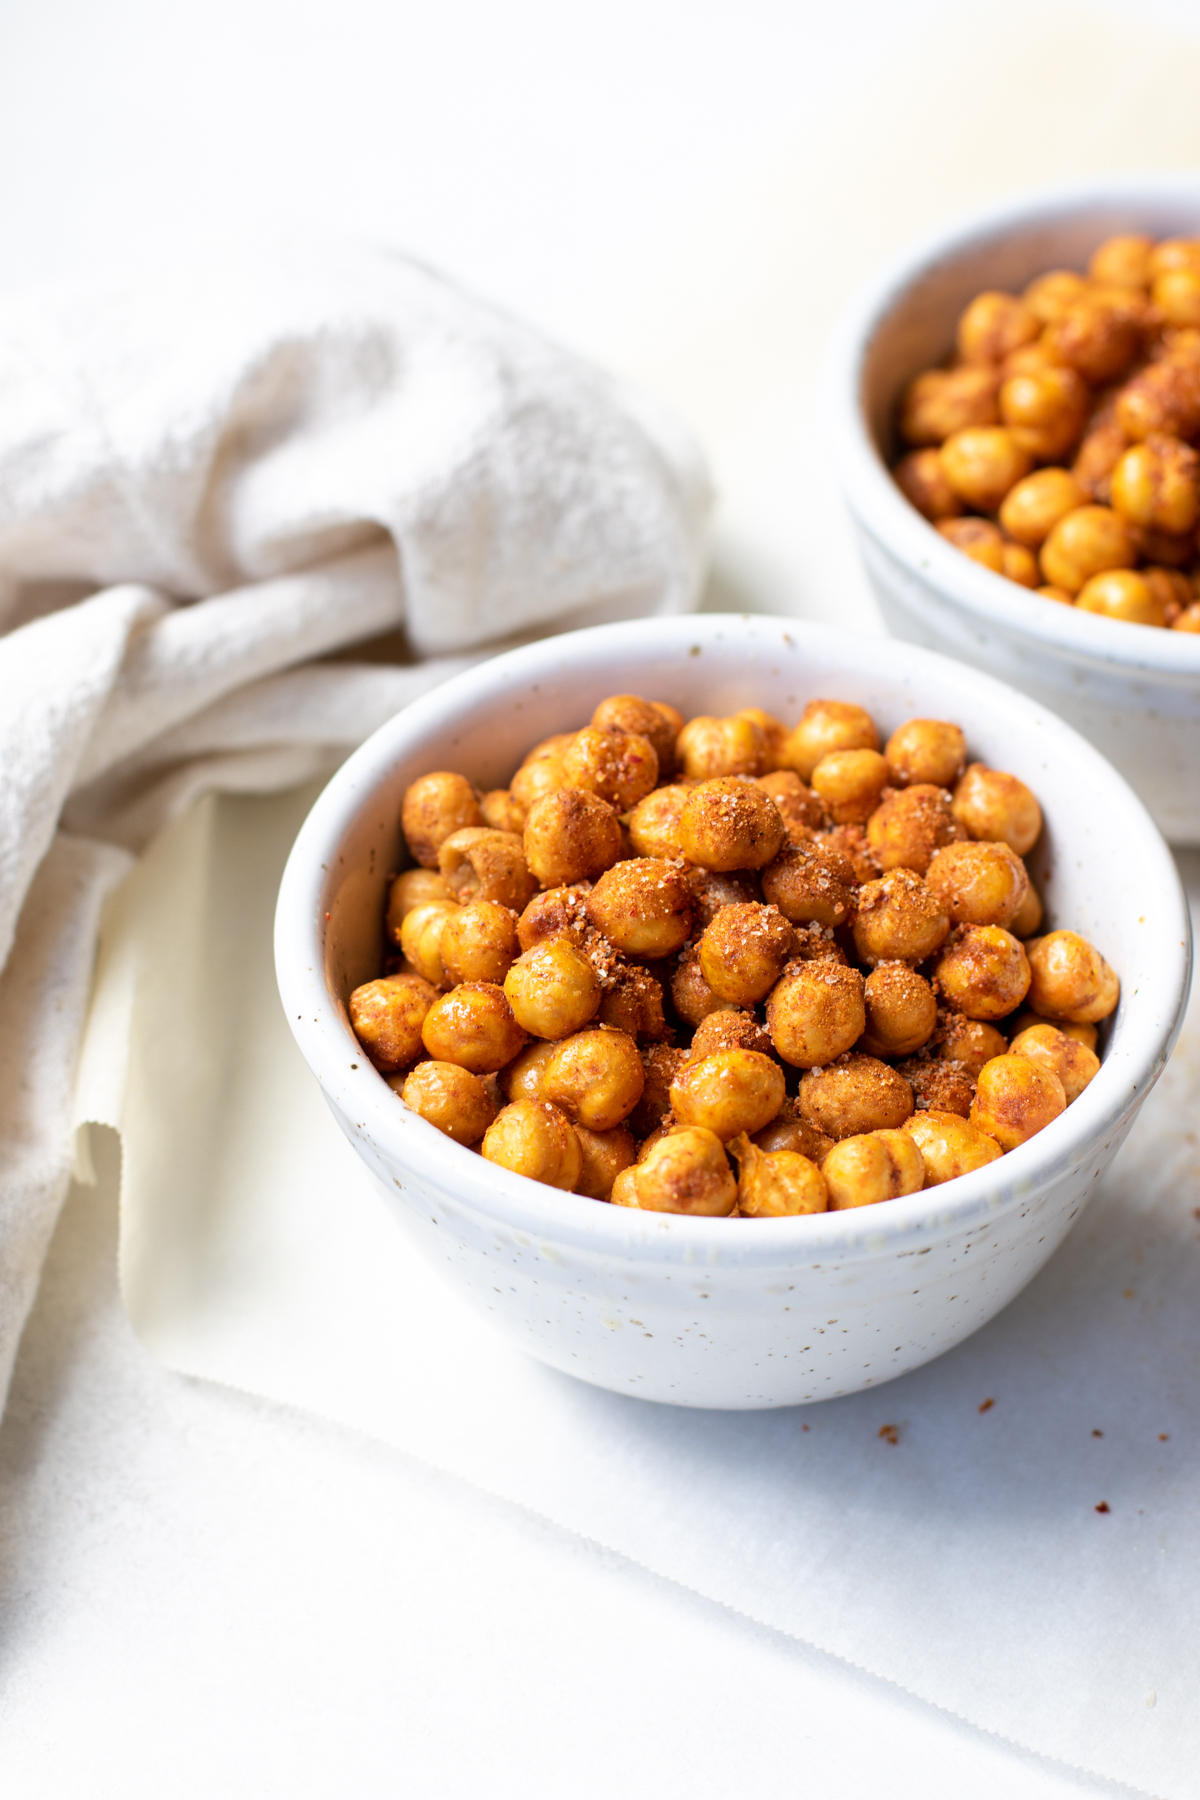 Side view of air fryer chickpeas in a white bowl with beige napkin.